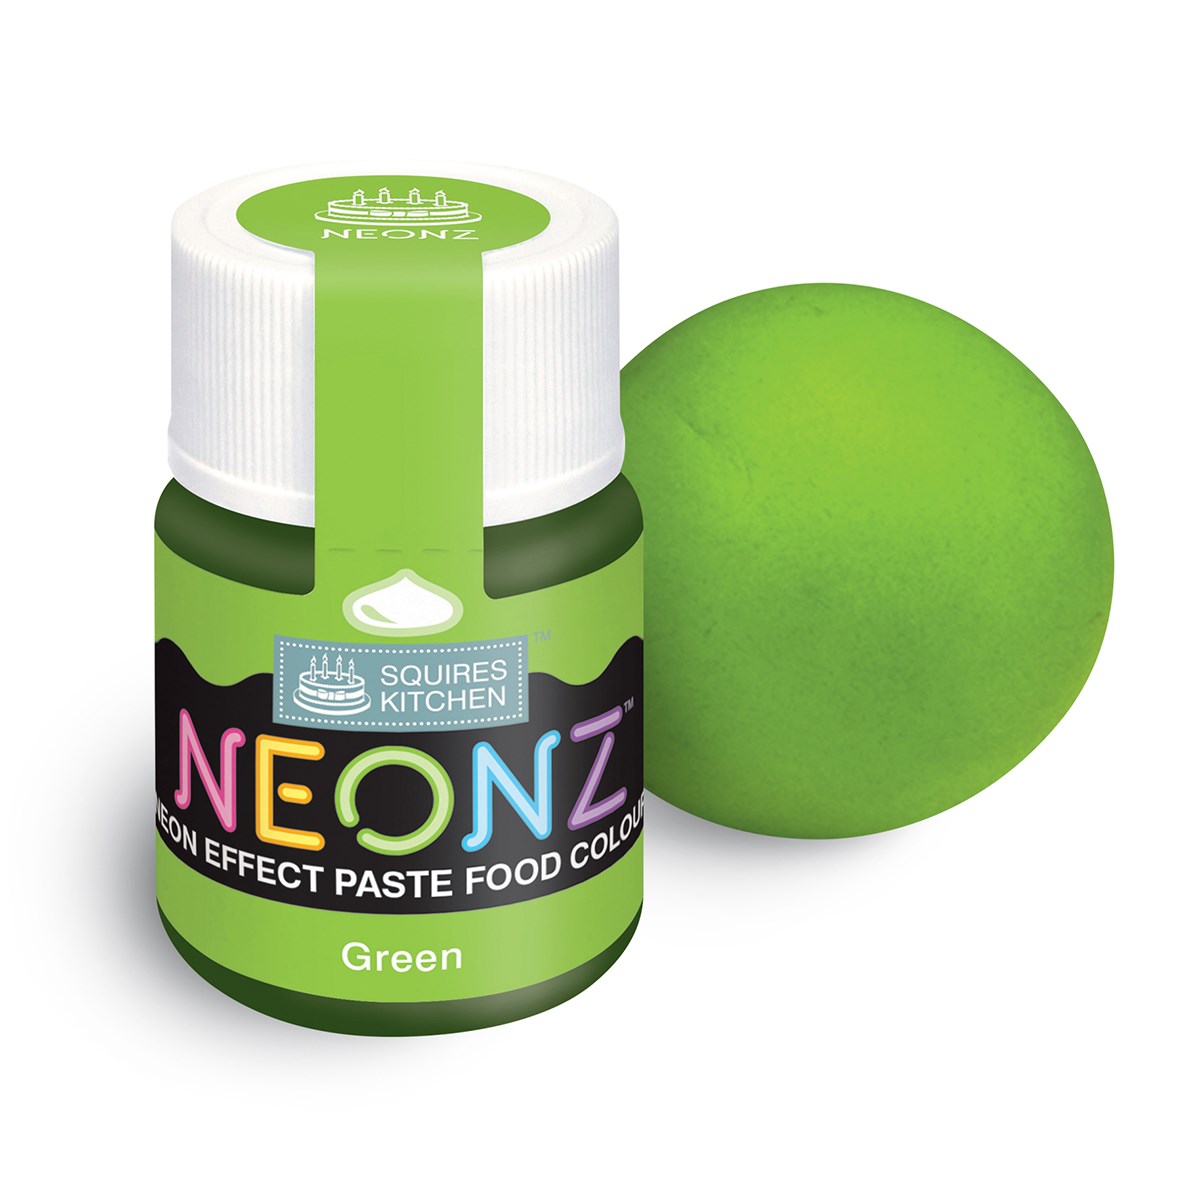 Squires Kitchen Neonz Neon Effect Concentrated Paste Food Colouring - 20g - Green